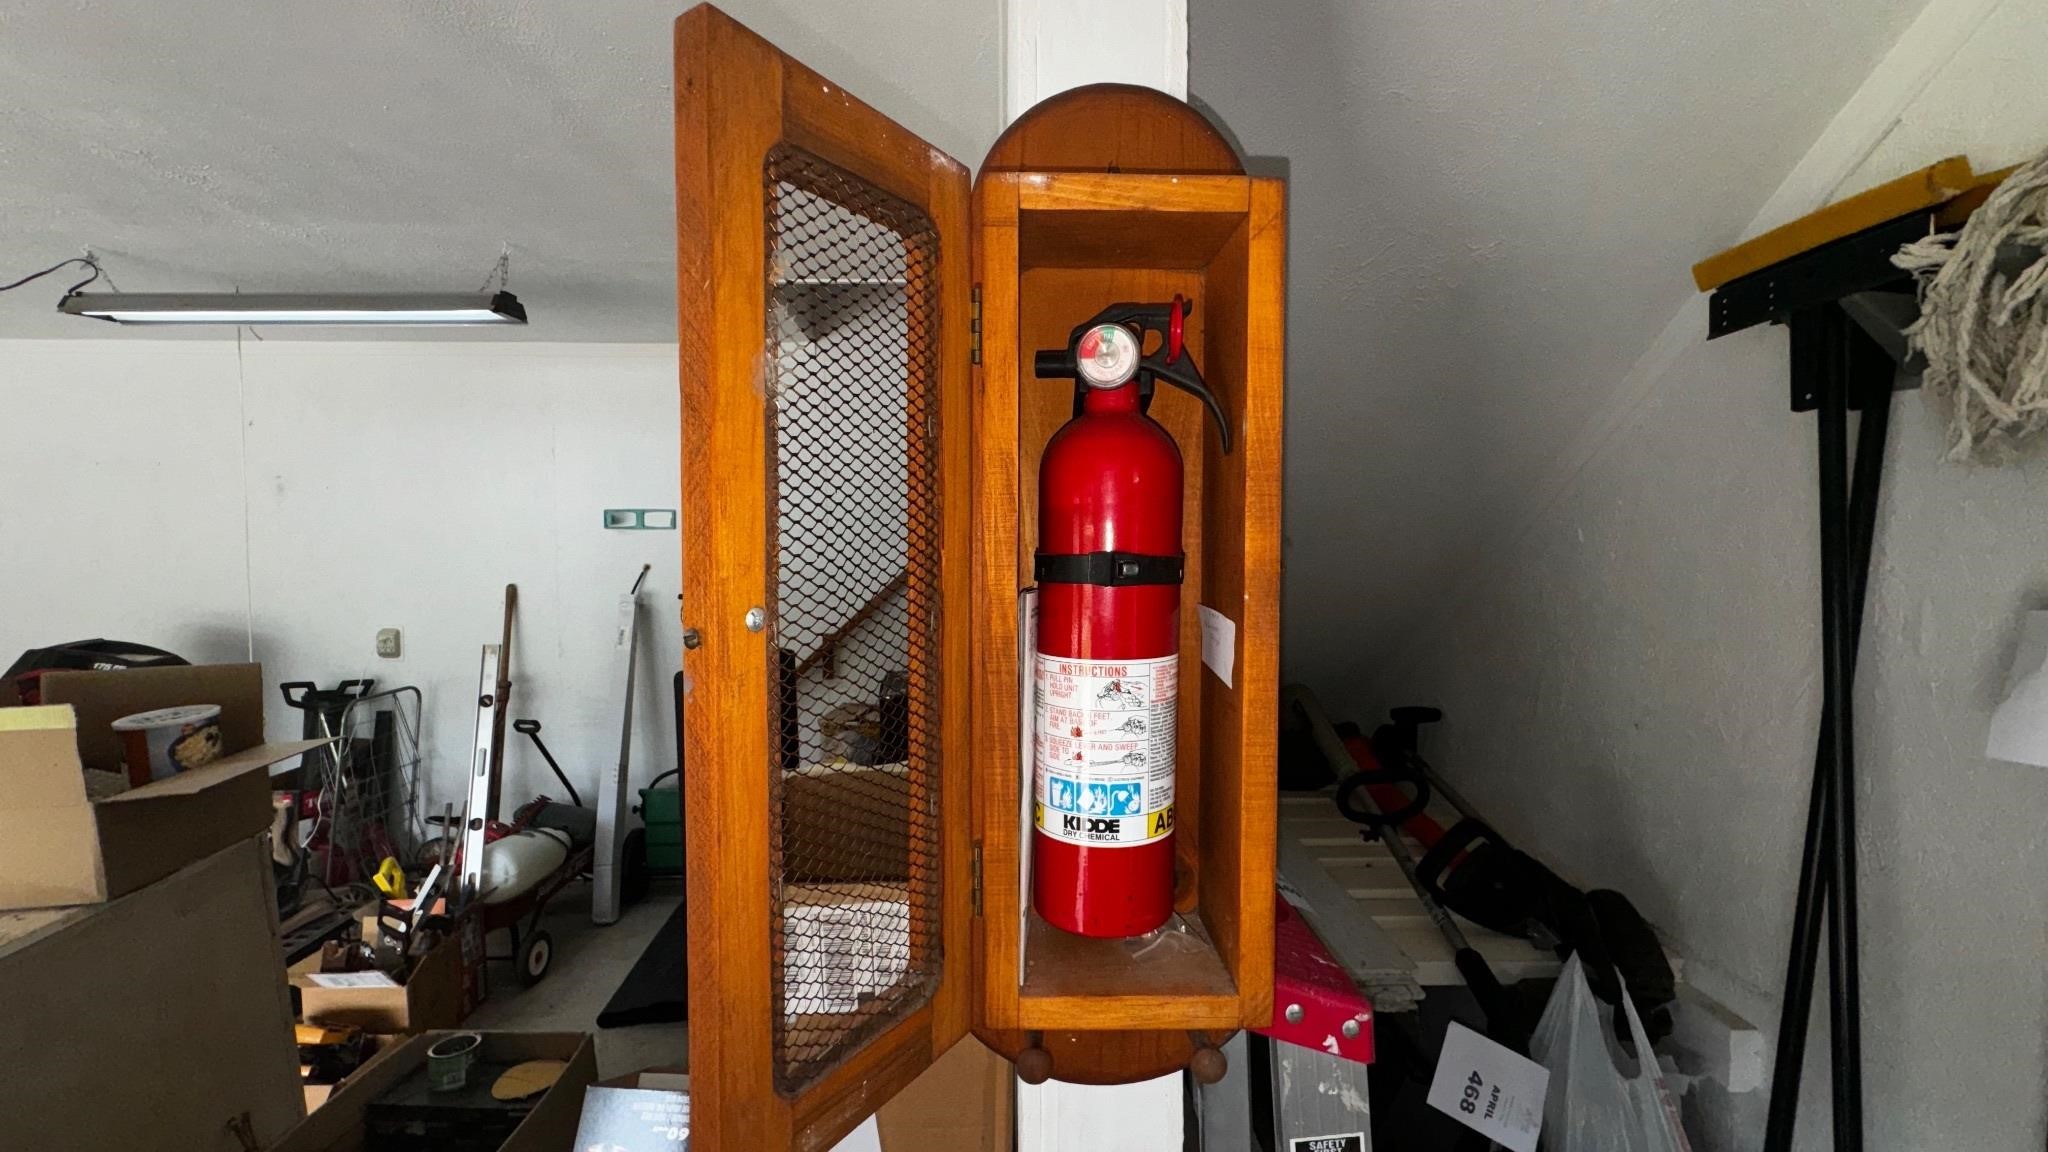 Fire extinguisher in a Wooden cabinet.